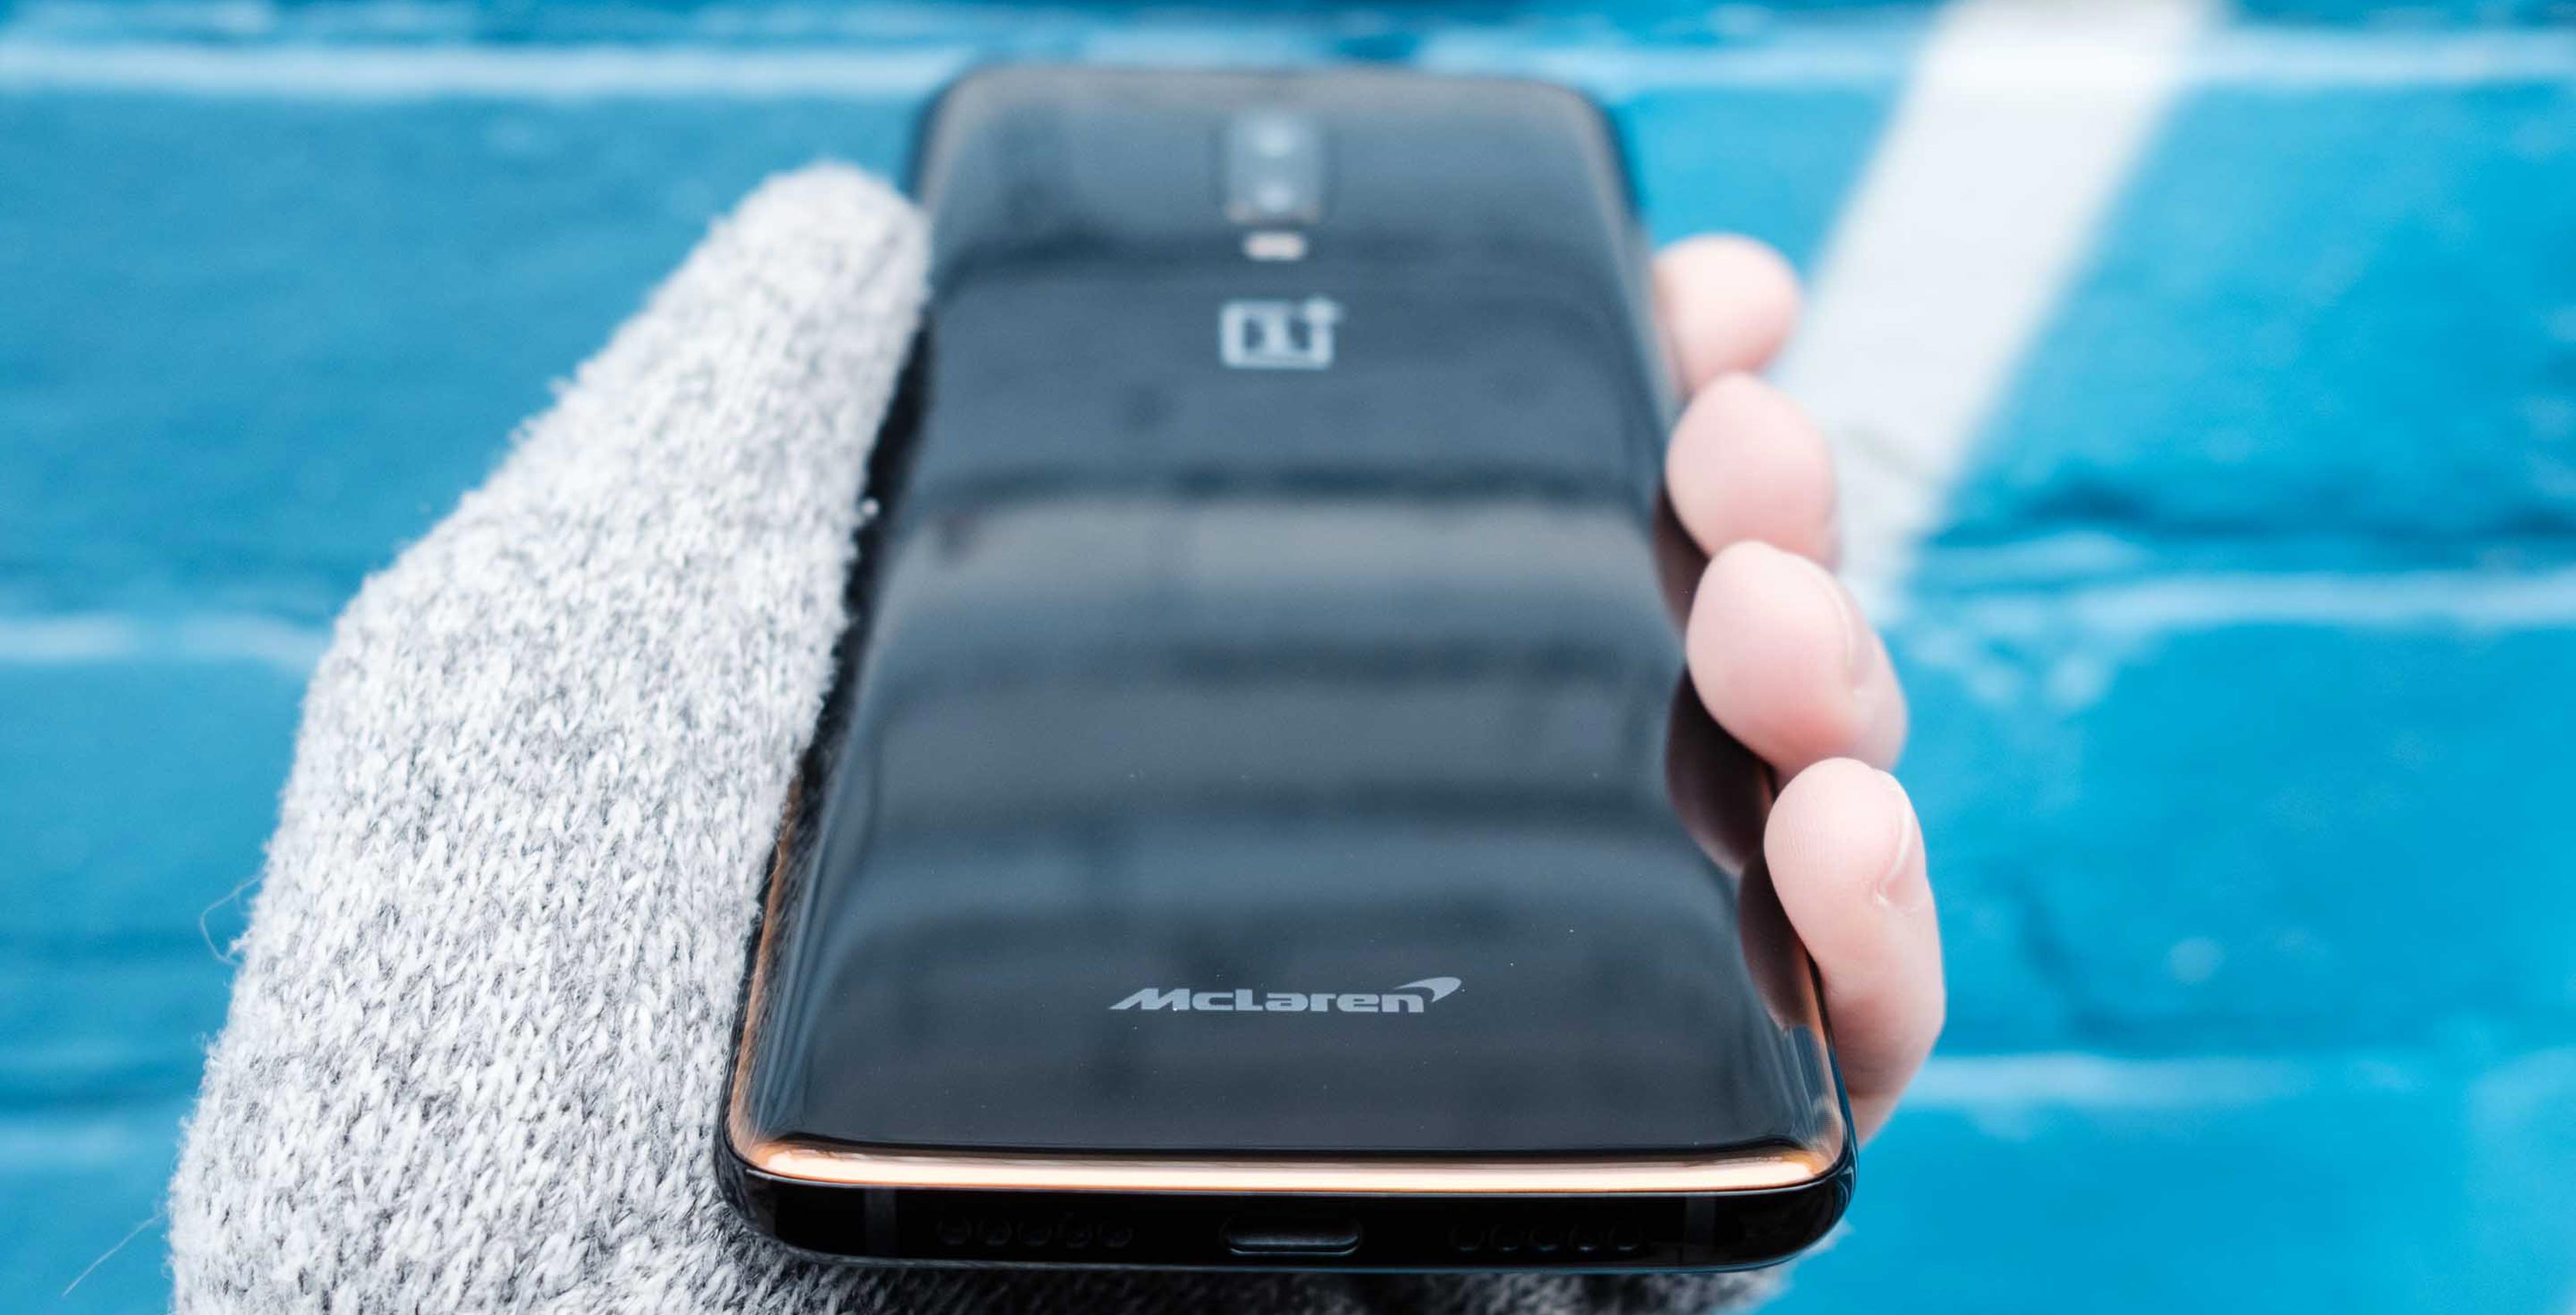 The OnePlus 6T McLaren Edition is available today for $699